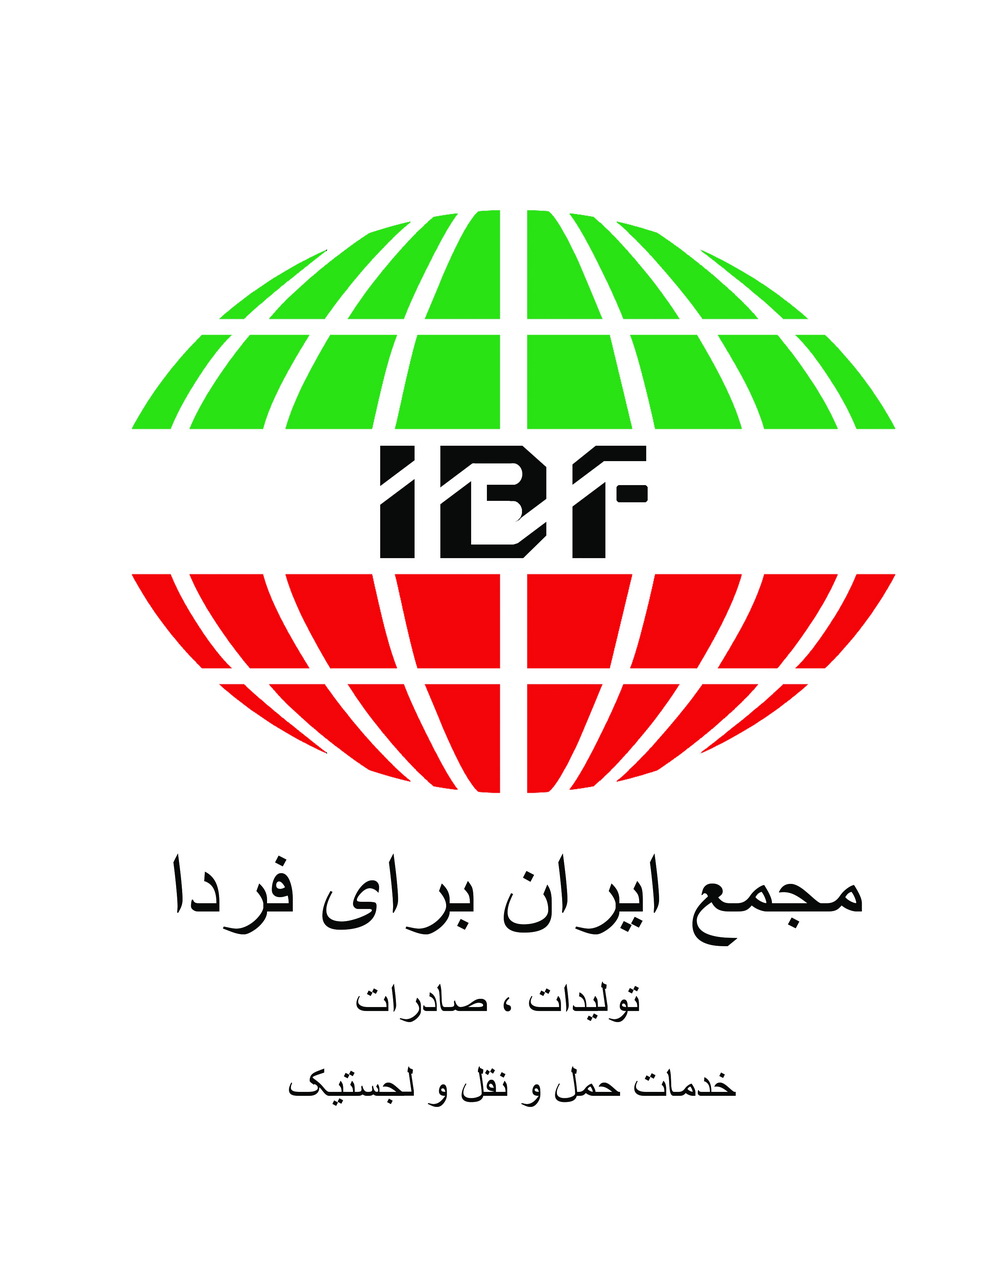 Iran Business for Future- Production Export (IBF), Transportation & Logistics   Services